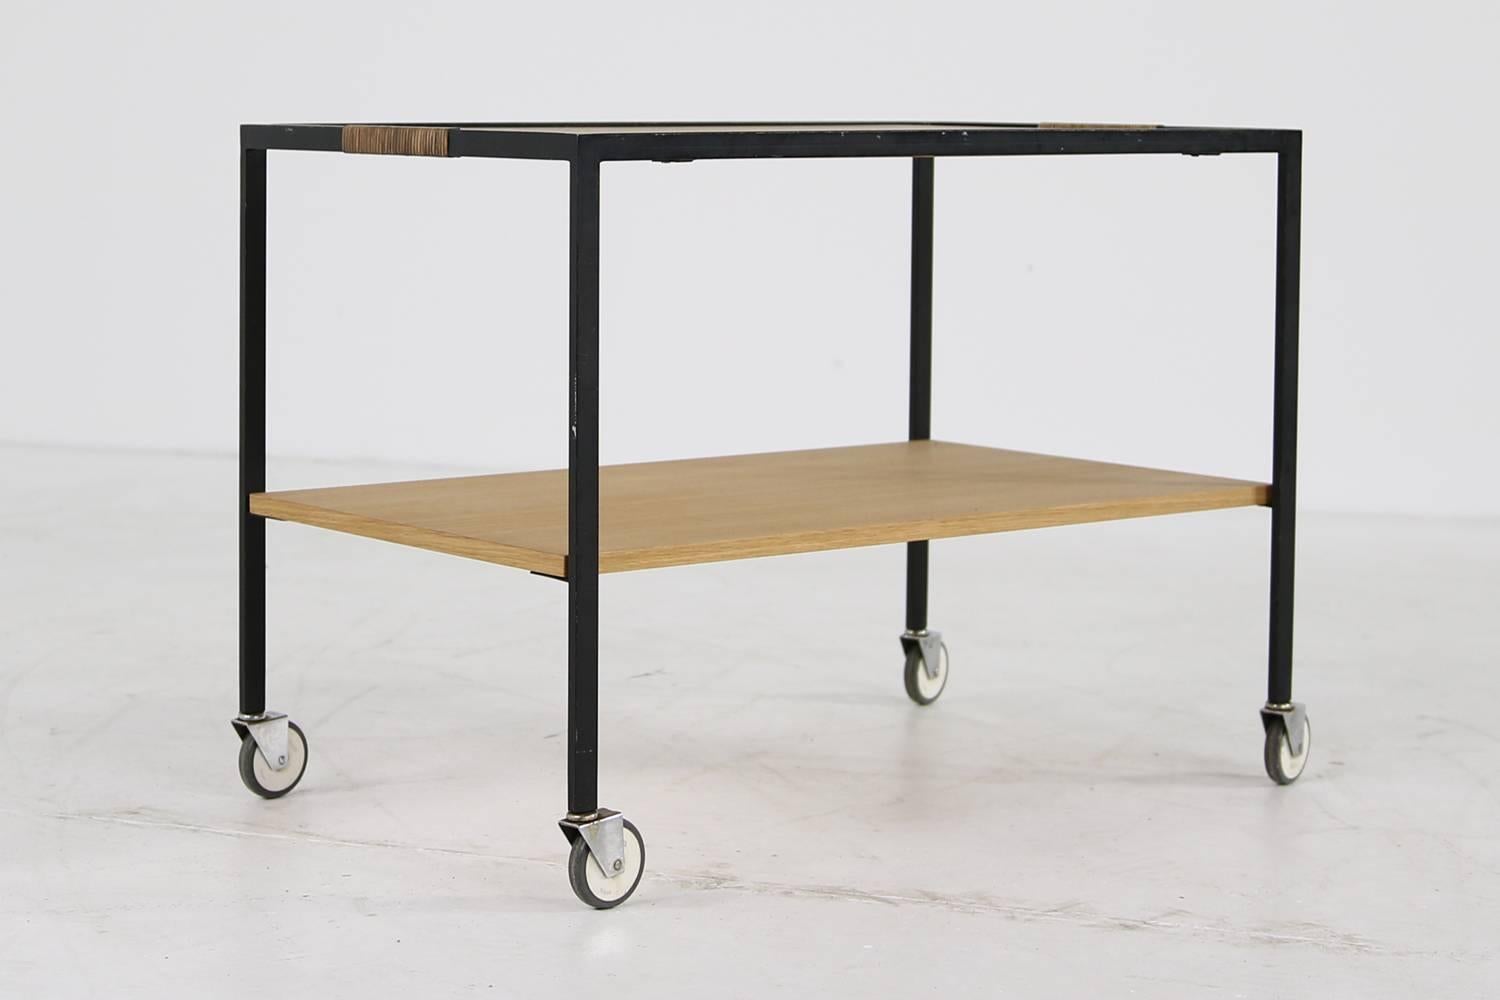 Beautiful Minimalist oak and steel bar cart, design attributed to Herbert Hirche for Holzaepfel or Rosenthal, Germany, 1950s.
Very good condition, the both oak wooden plates were restored and are in a perfect condition.